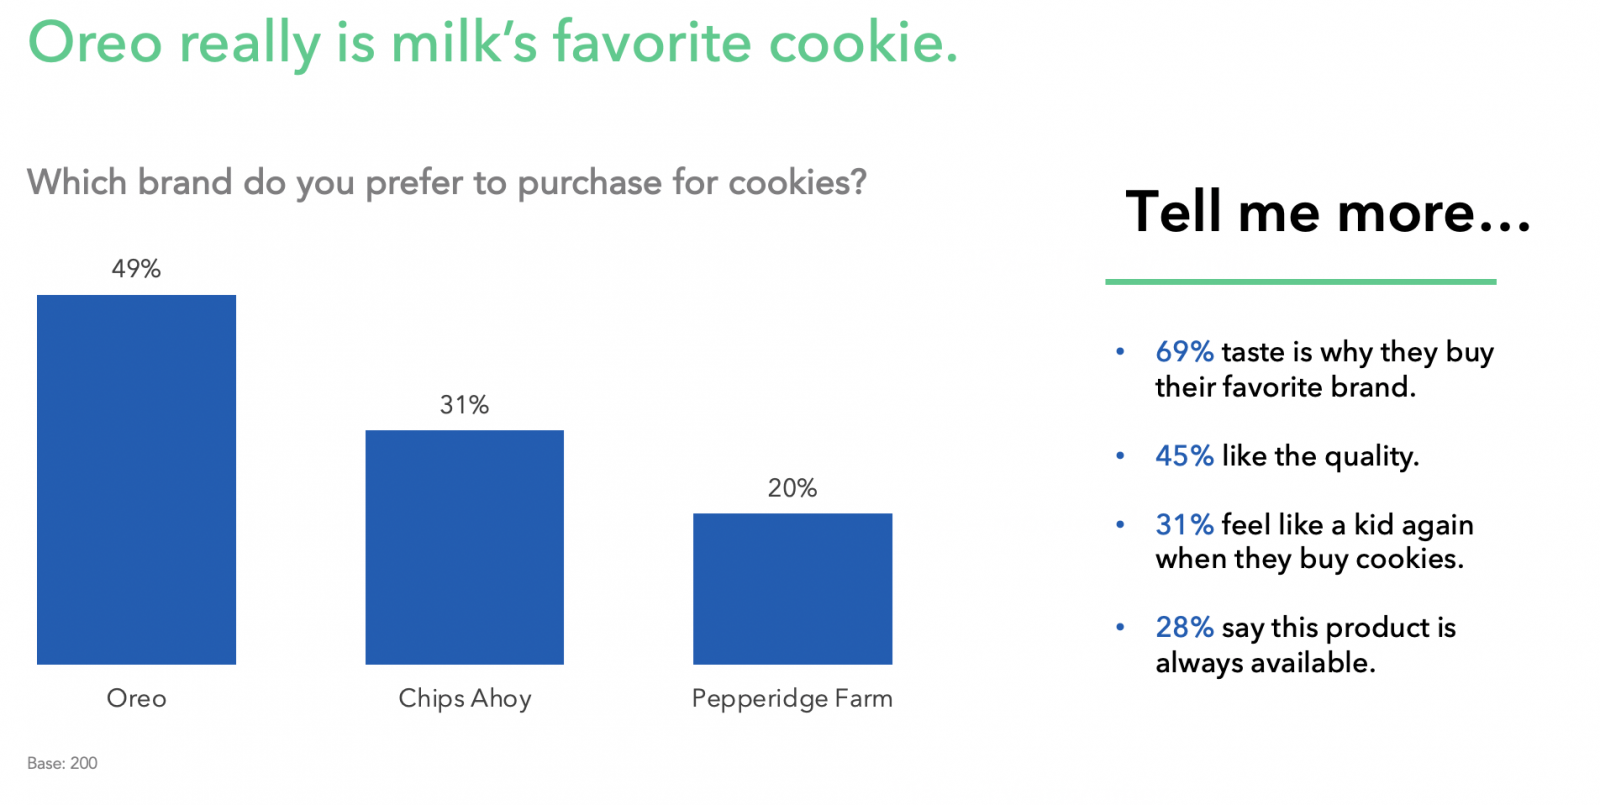 49% of consumers prefer to purchase Oreos for cookies. 69% say taste is why they buy their favorite brand.